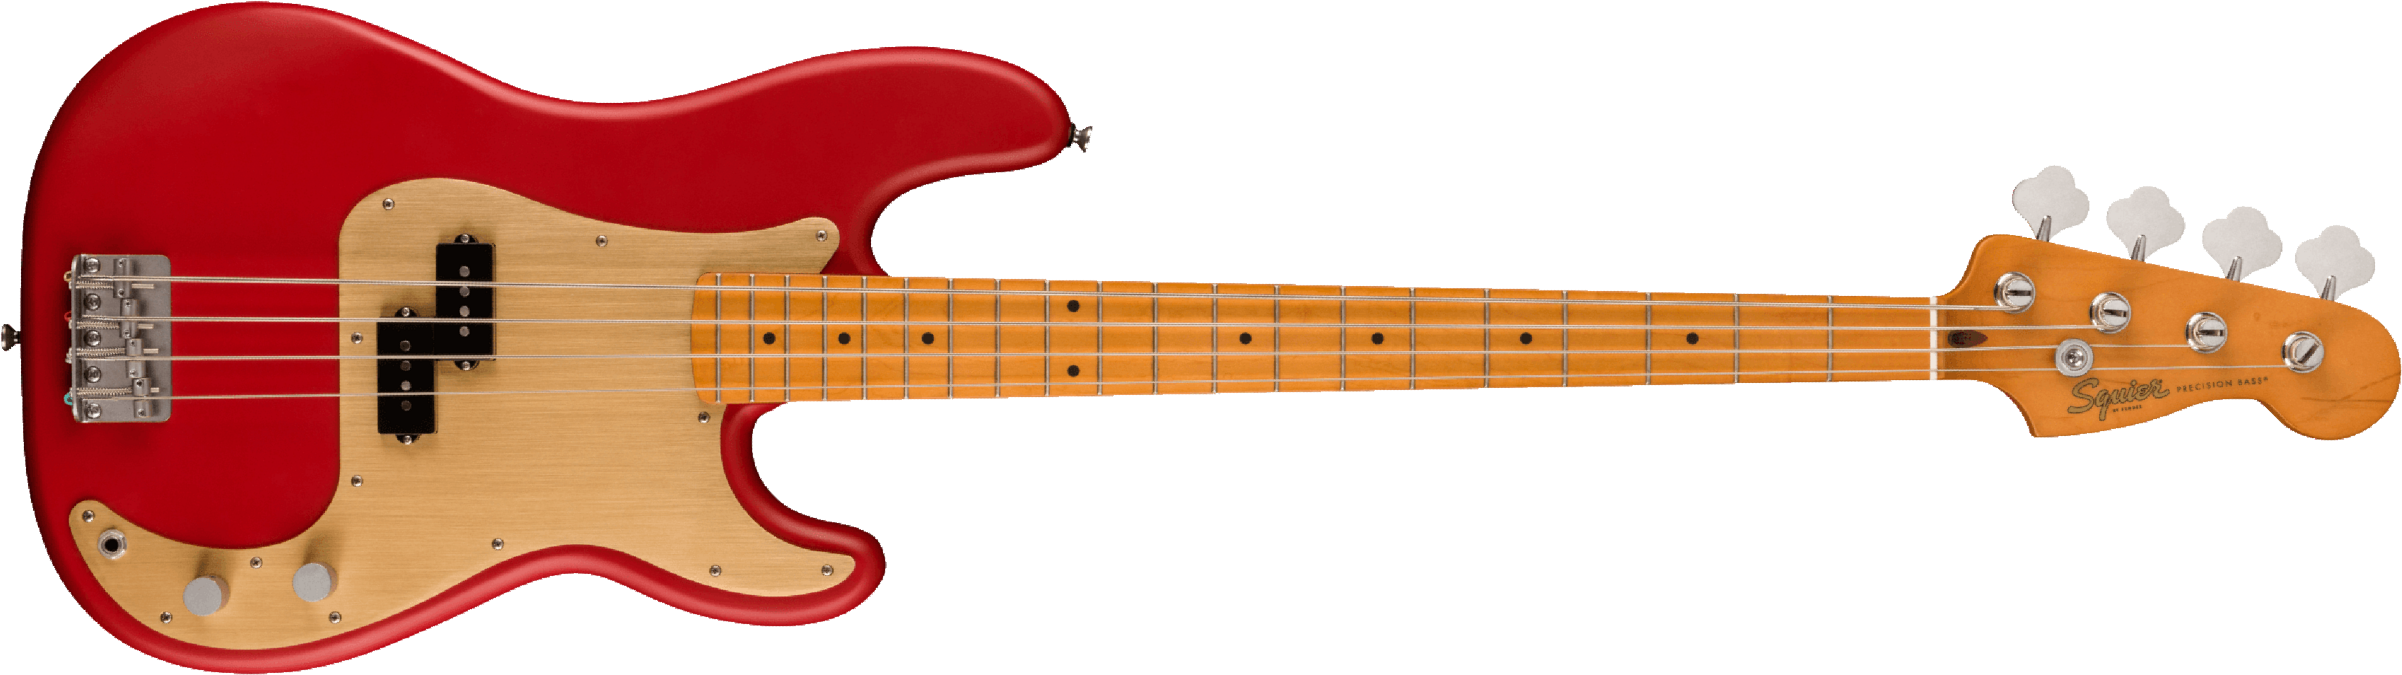 Squier Precision Bass 40th Anniversary Gold Edition Mn - Satin Dakota Red - Basse Électrique Solid Body - Main picture